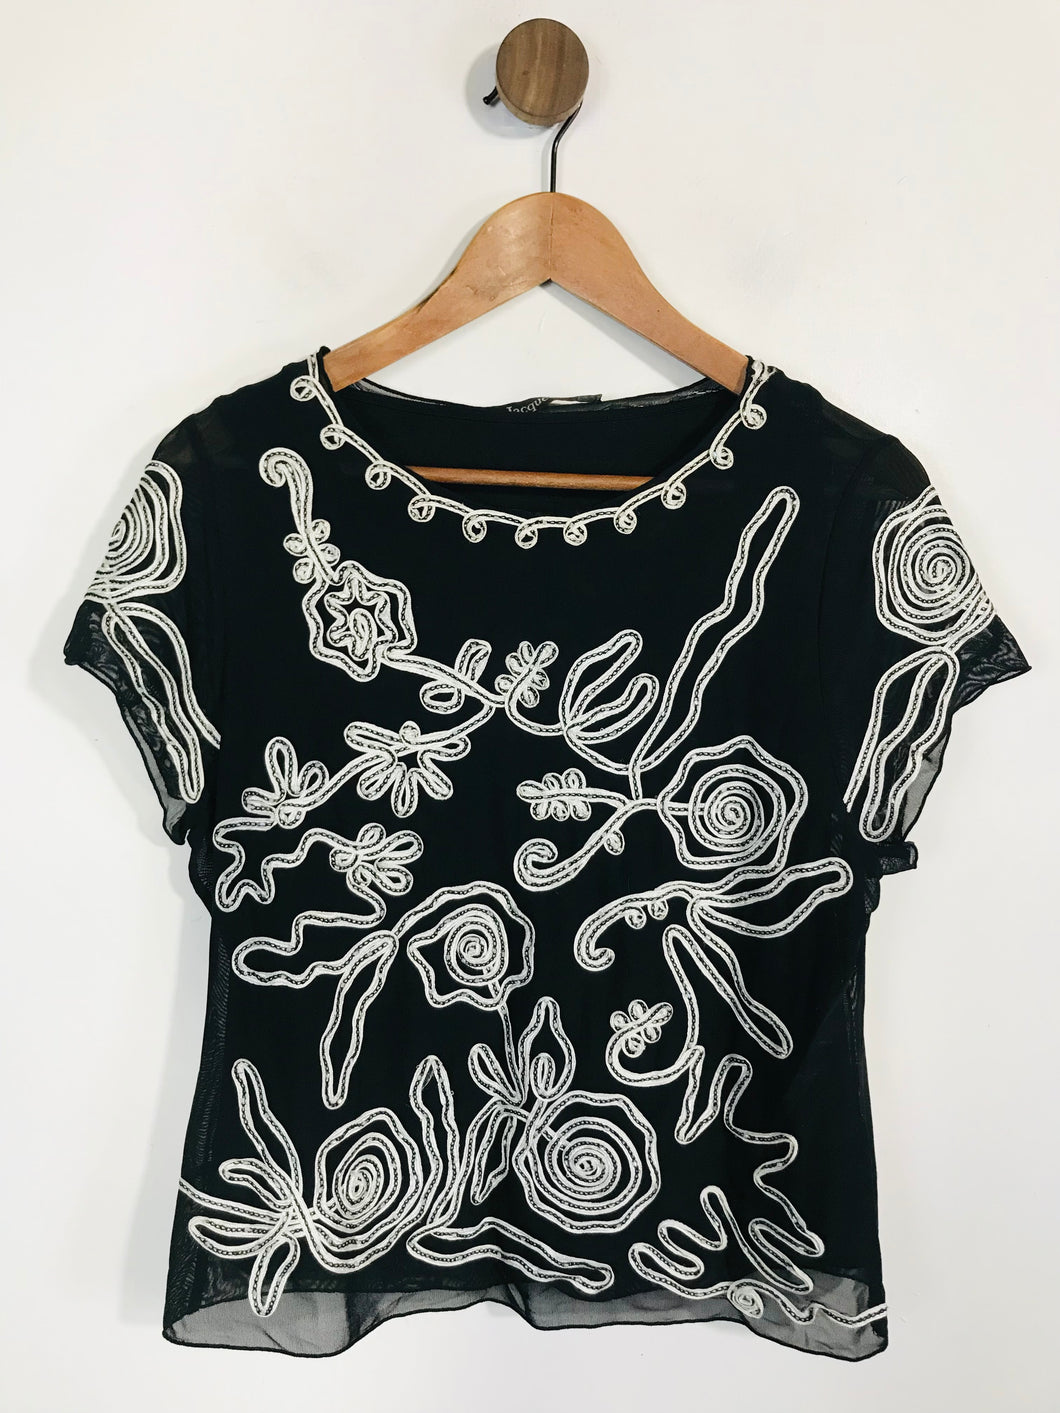 Jacques Vert Women's Floral Embroidered T-Shirt | S UK8 | Black